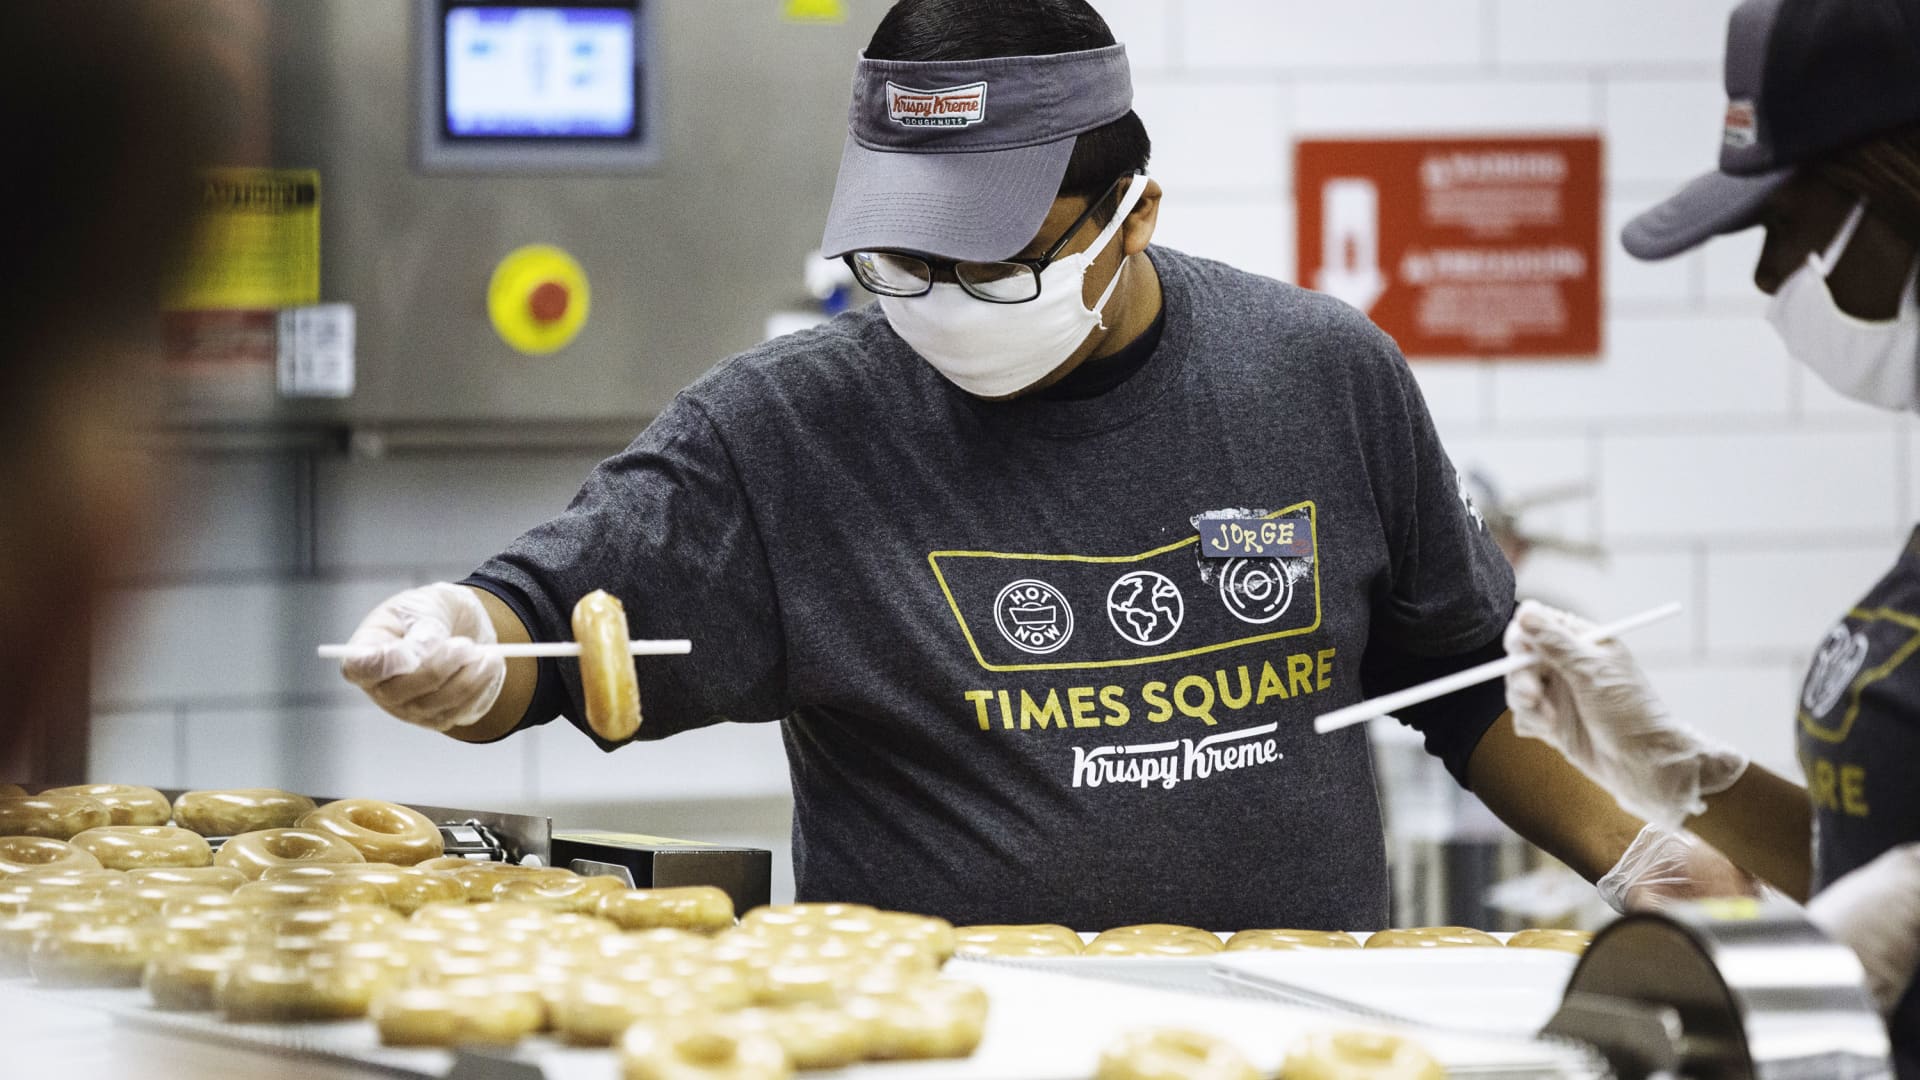 An employee wearing a protective mask removes a doughnut from a production line inside a Krispy Kreme Doughnuts Inc. store in the Times Square neighborhood of New York, on Thursday, Sept. 10, 2020.